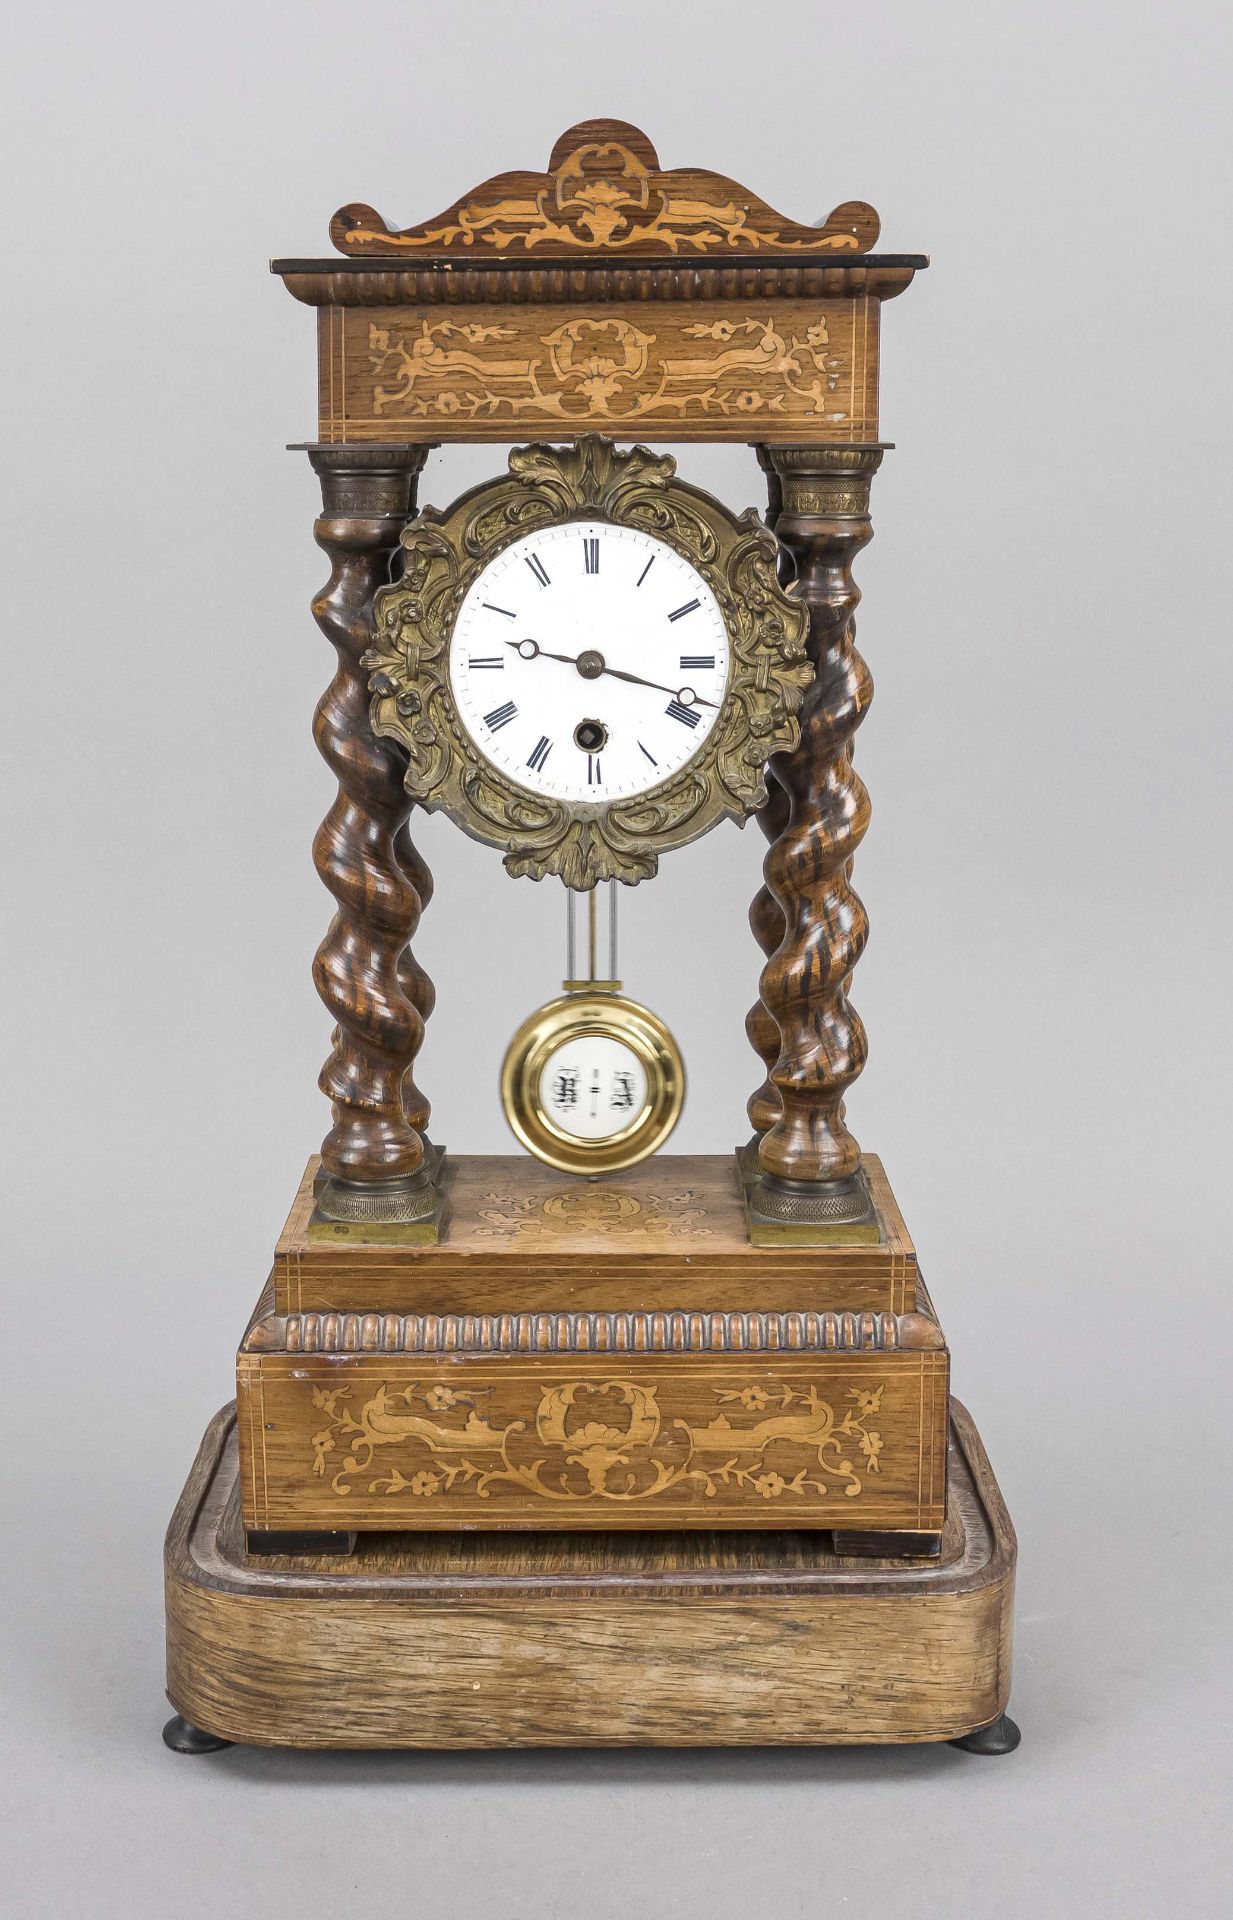 Portalu clock, France, c. 1870-80, walnut wood case with turned full columns, brass bases and